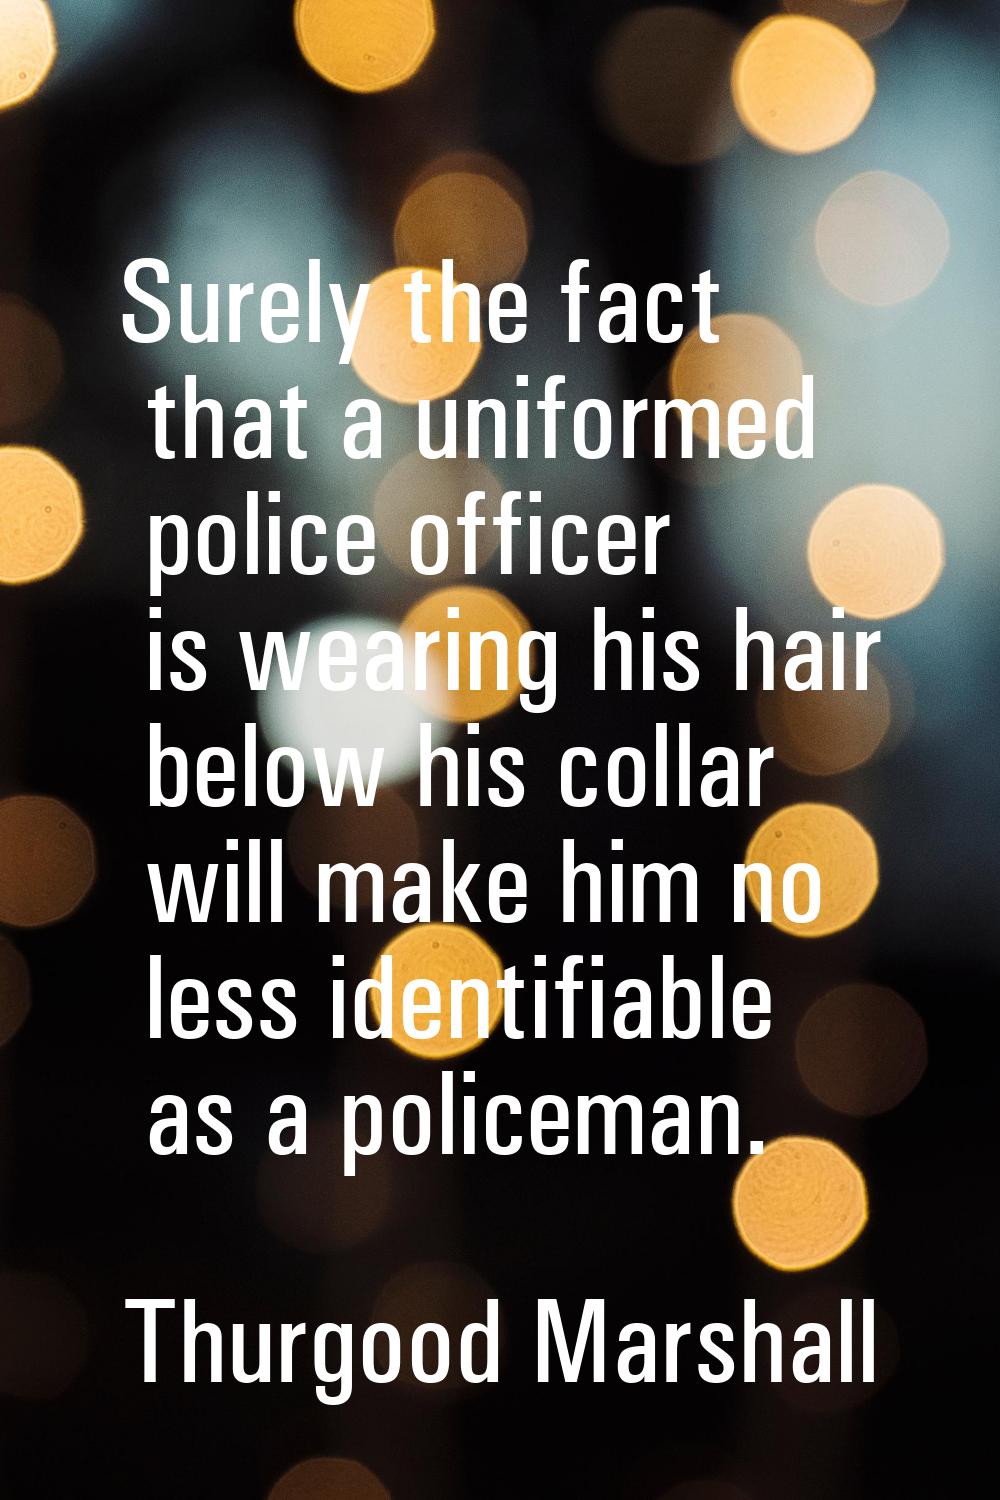 Surely the fact that a uniformed police officer is wearing his hair below his collar will make him 